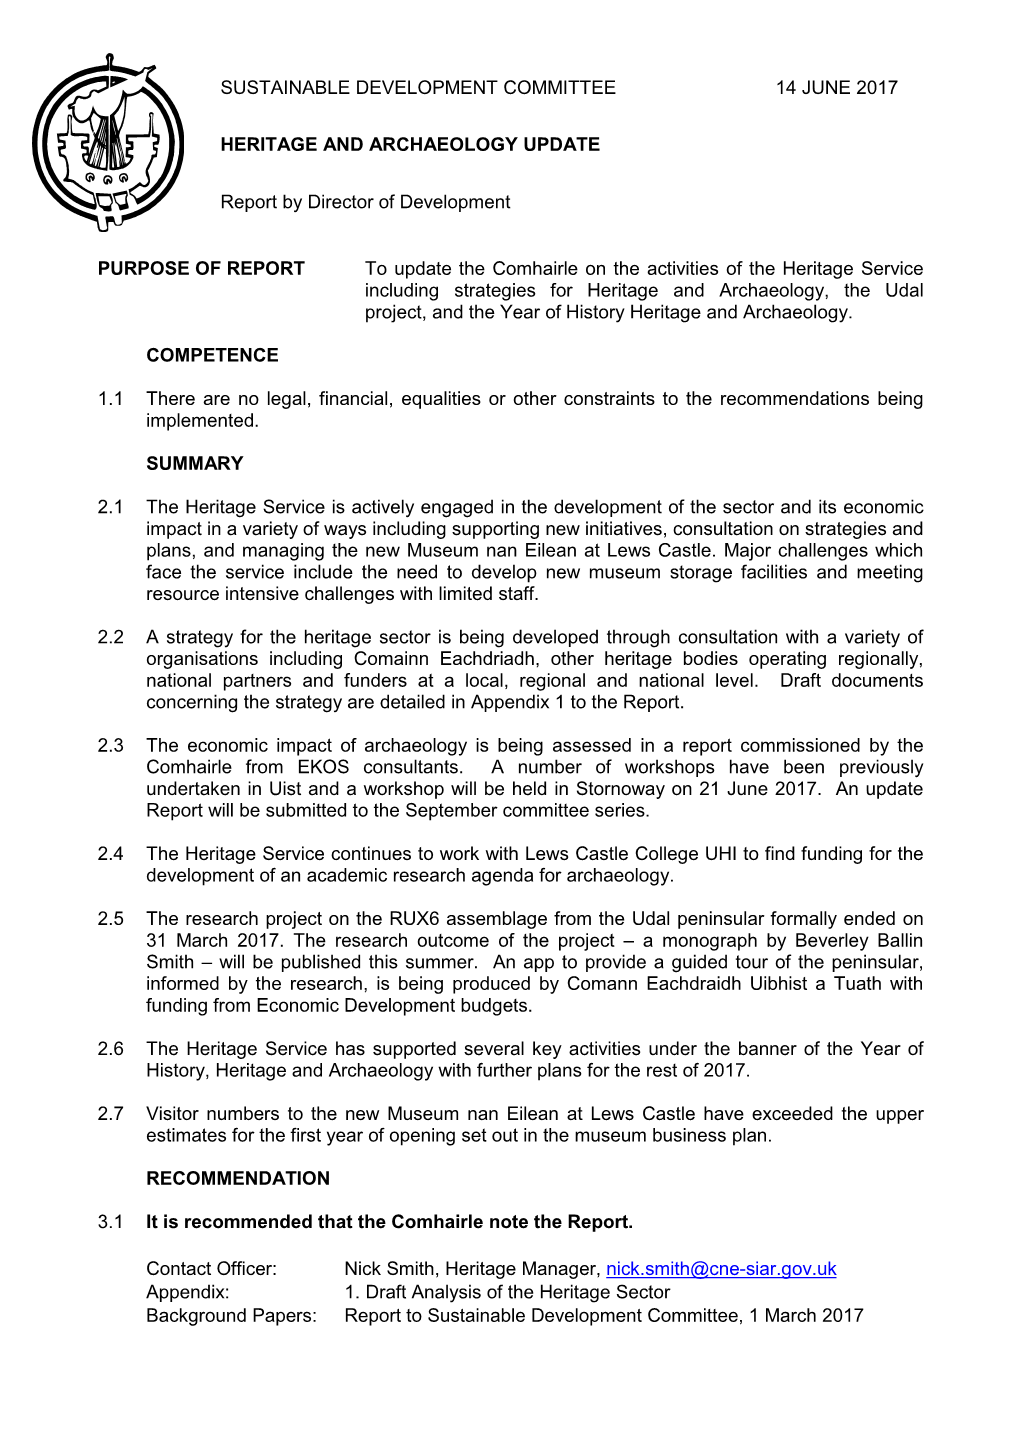 PURPOSE of REPORT to Update the Comhairle on the Activities of The